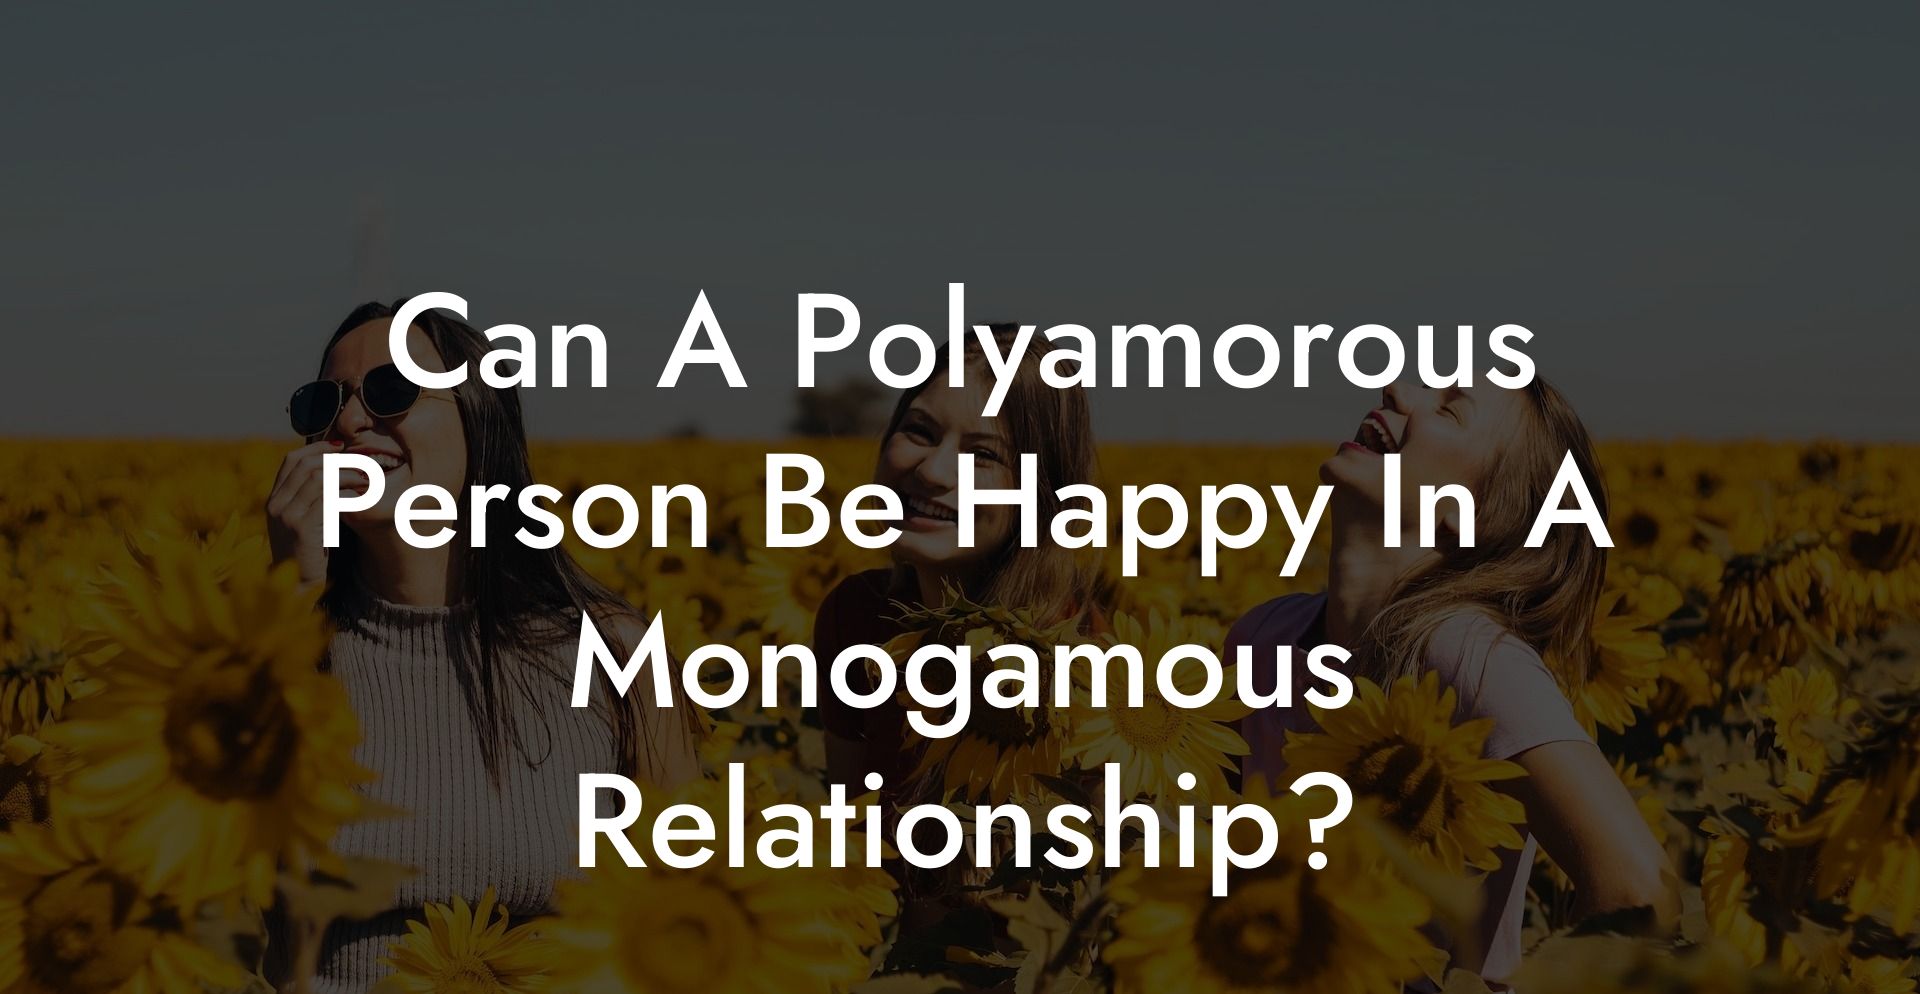 Can A Polyamorous Person Be Happy In A Monogamous Relationship?